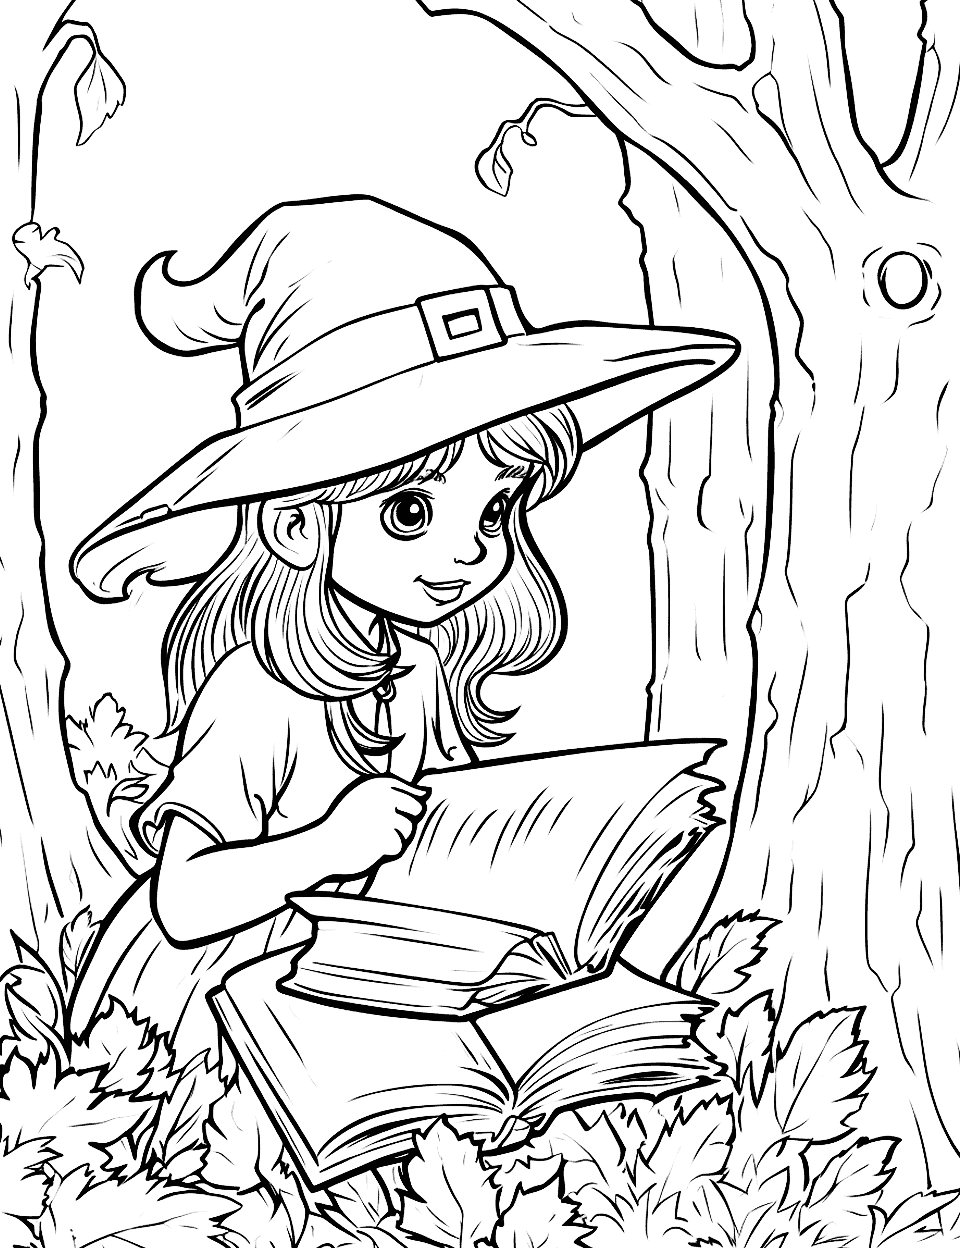 Witch's Spell Book Discovery Witch Coloring Page - A witch finds a hidden spell book in a tree trunk.